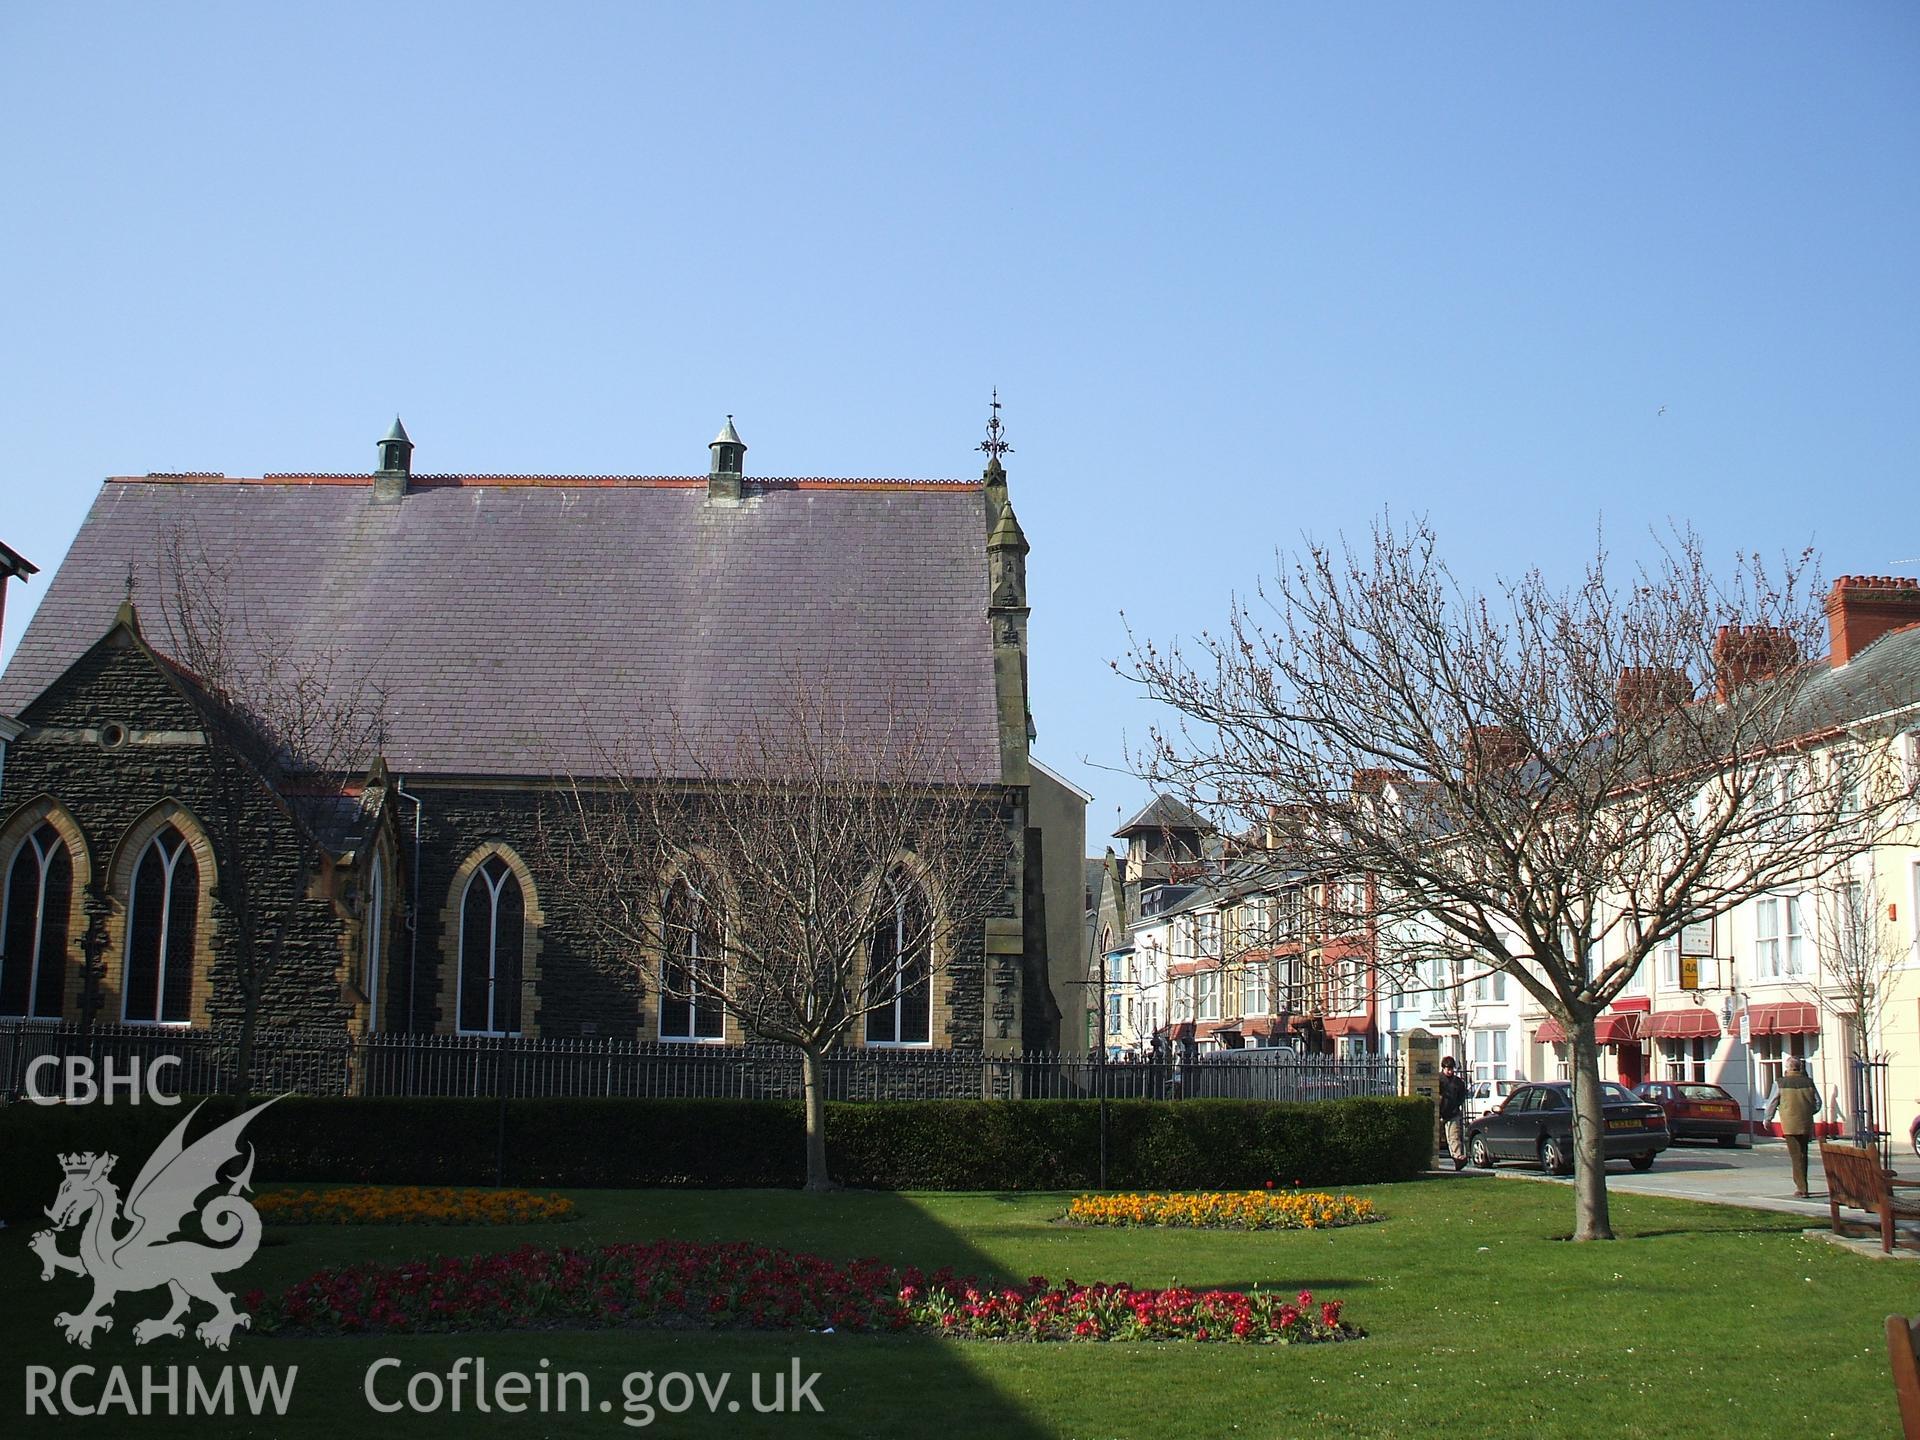 Colour digital photograph showing the exterior of Capel y Morfa, Aberystwyth.